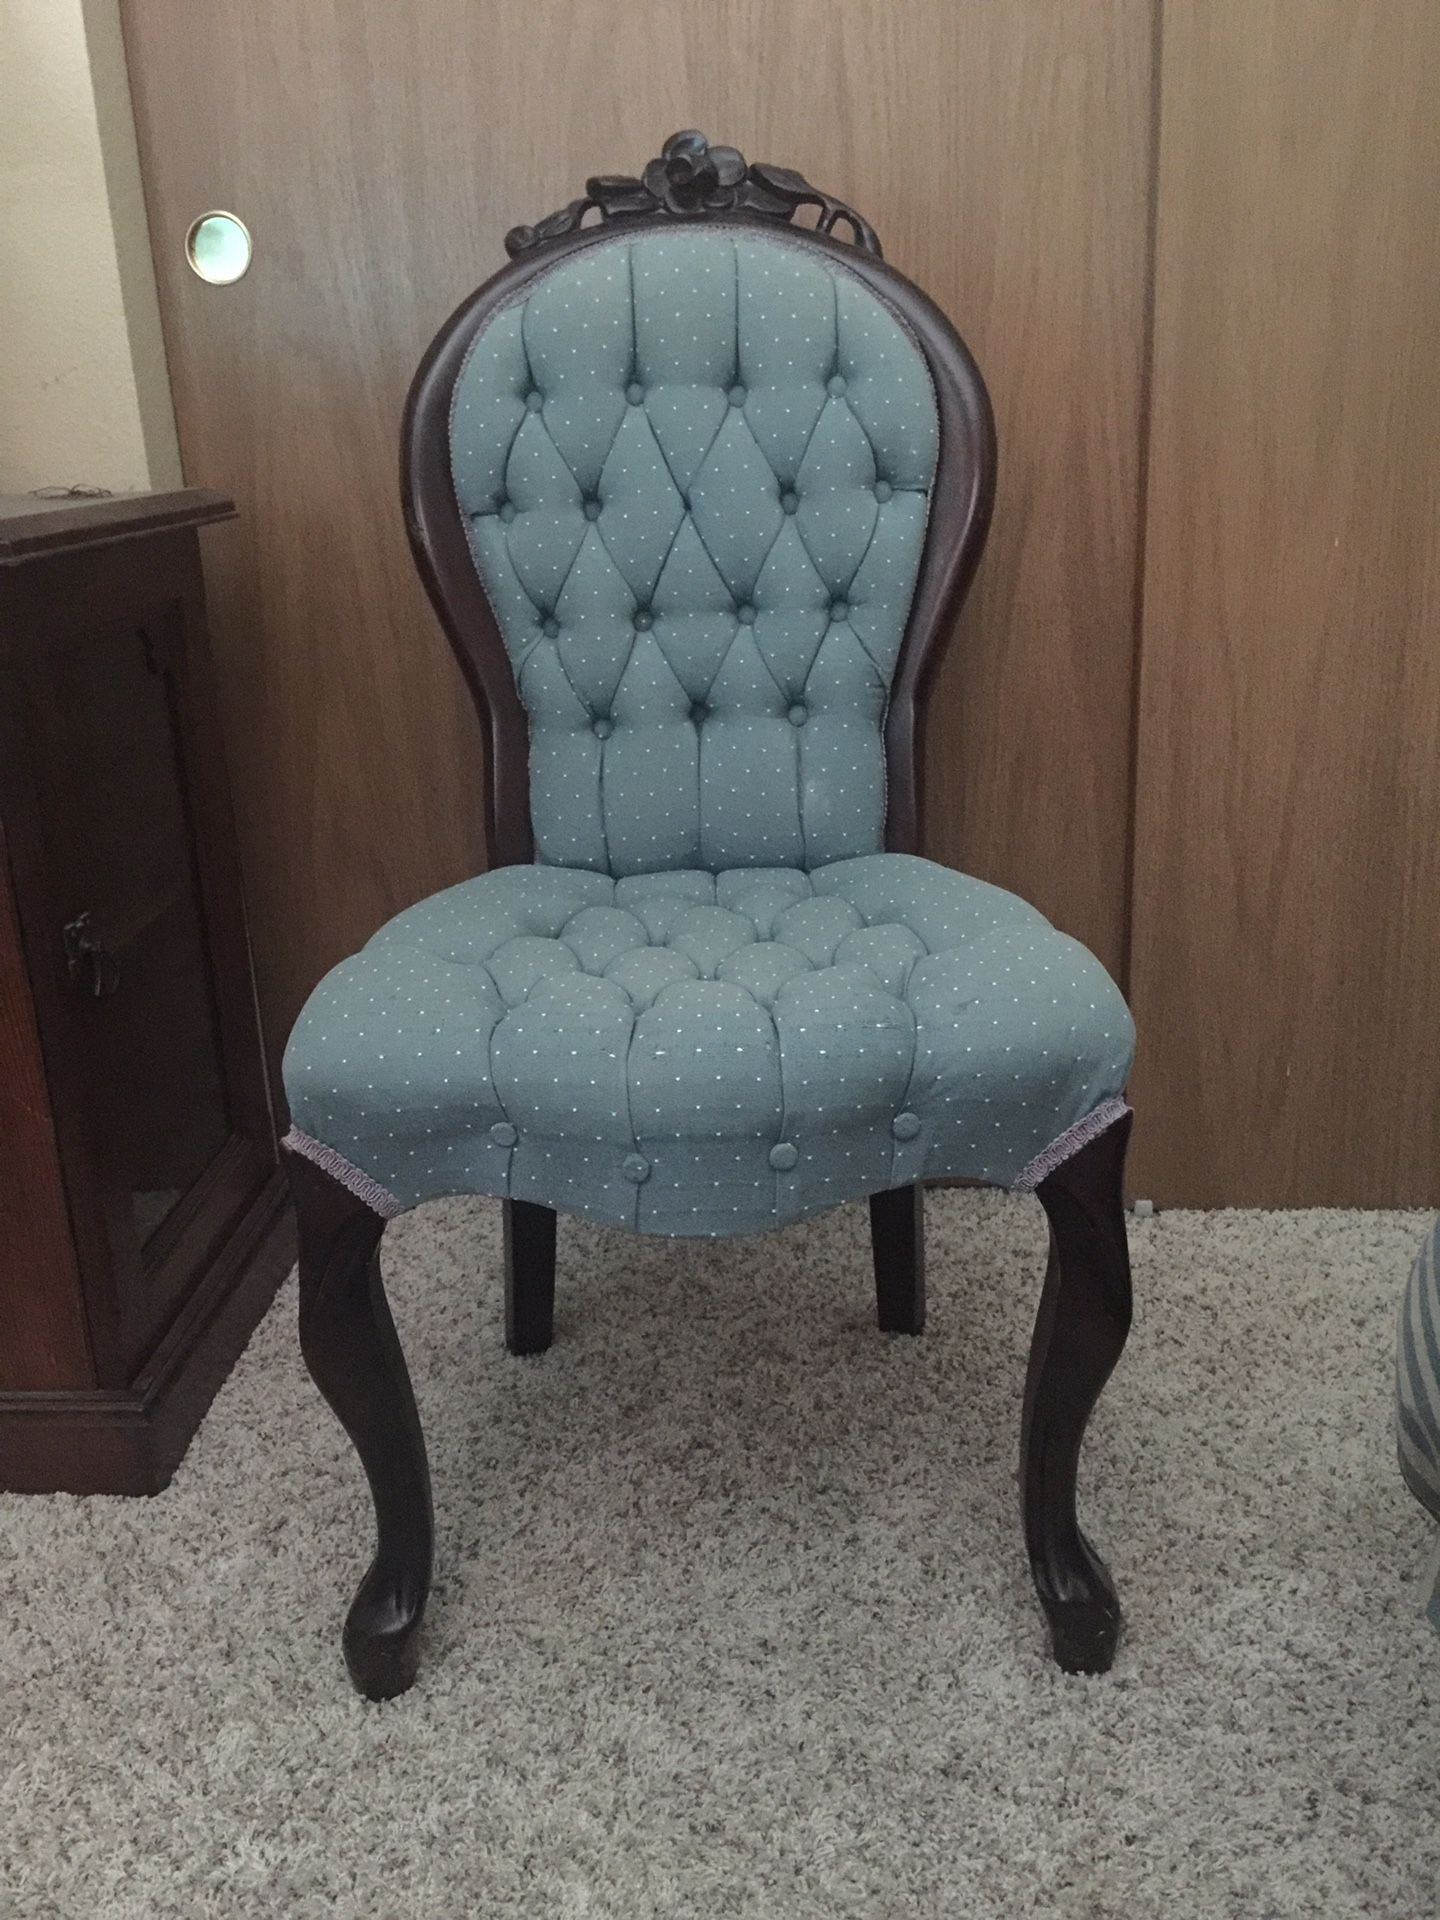 Old parlor chairs